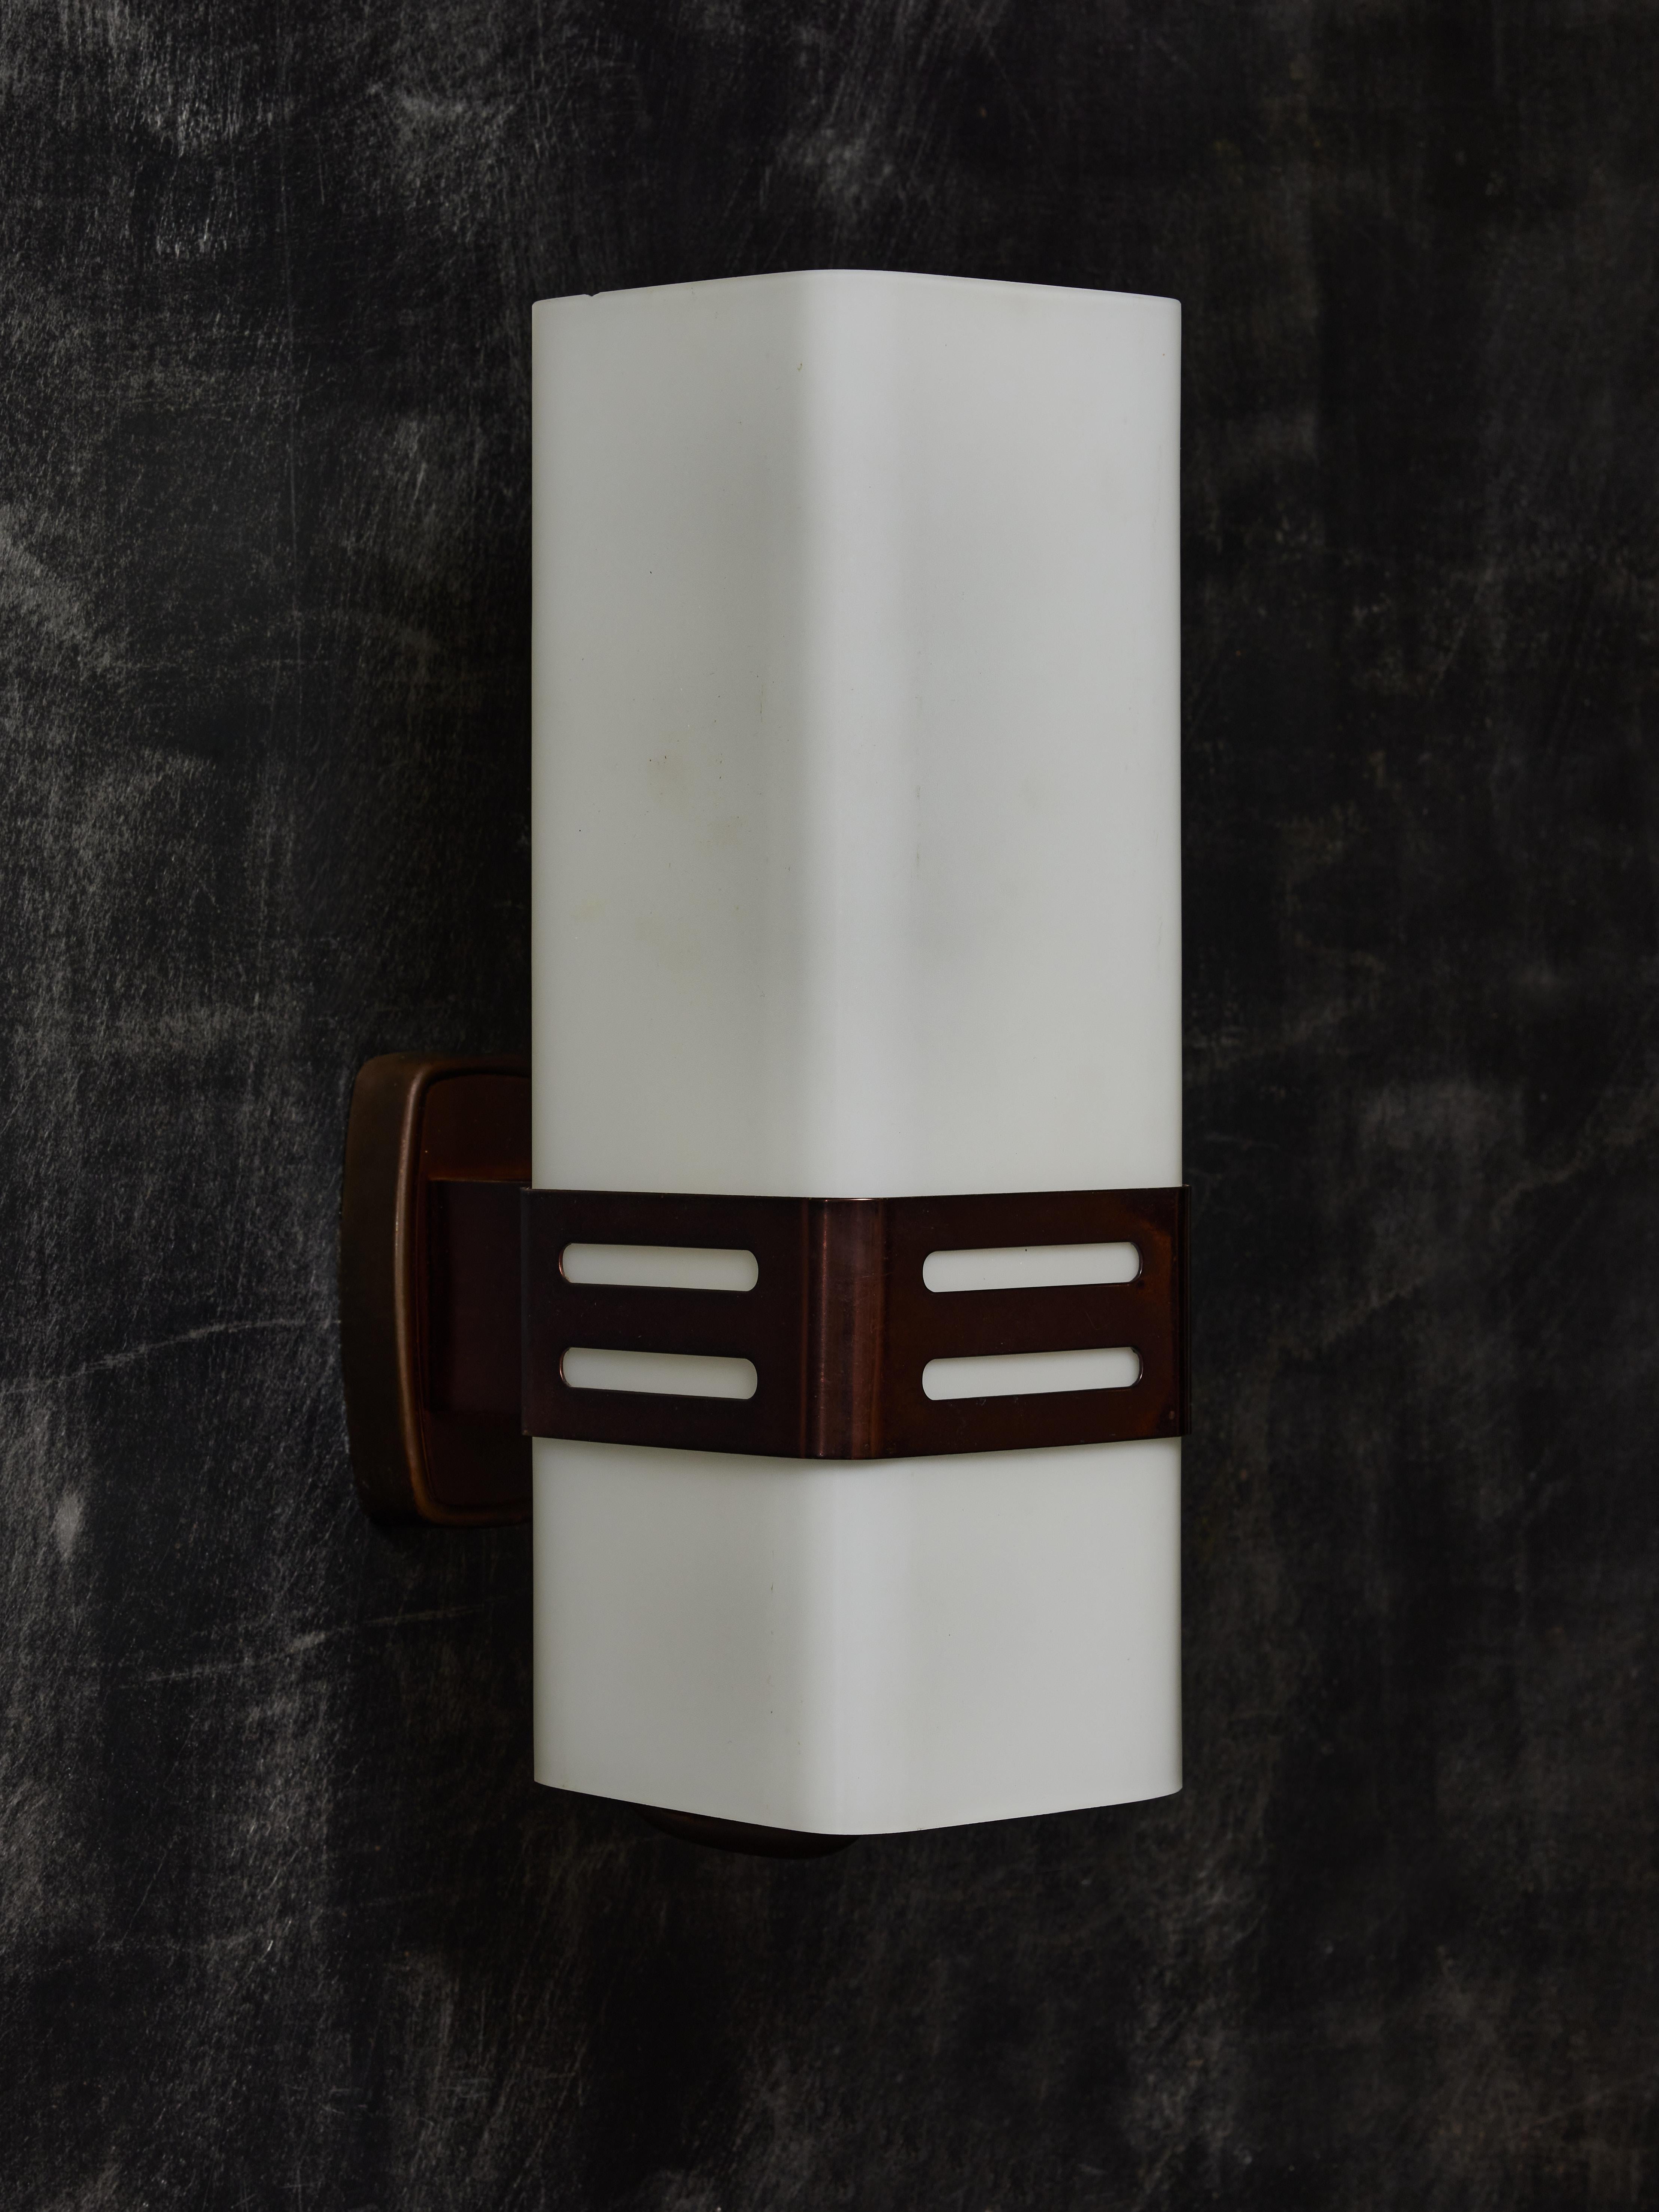 Pair of midcentury wall sconces made of a brass backplate and holder and a rectangular opaline glass diffuser. Original stamp of the manufacturer on the bases.

Stilnovo
Stilnovo is a prestigious Italian lighting manufacturer 
Founded in 1946 in